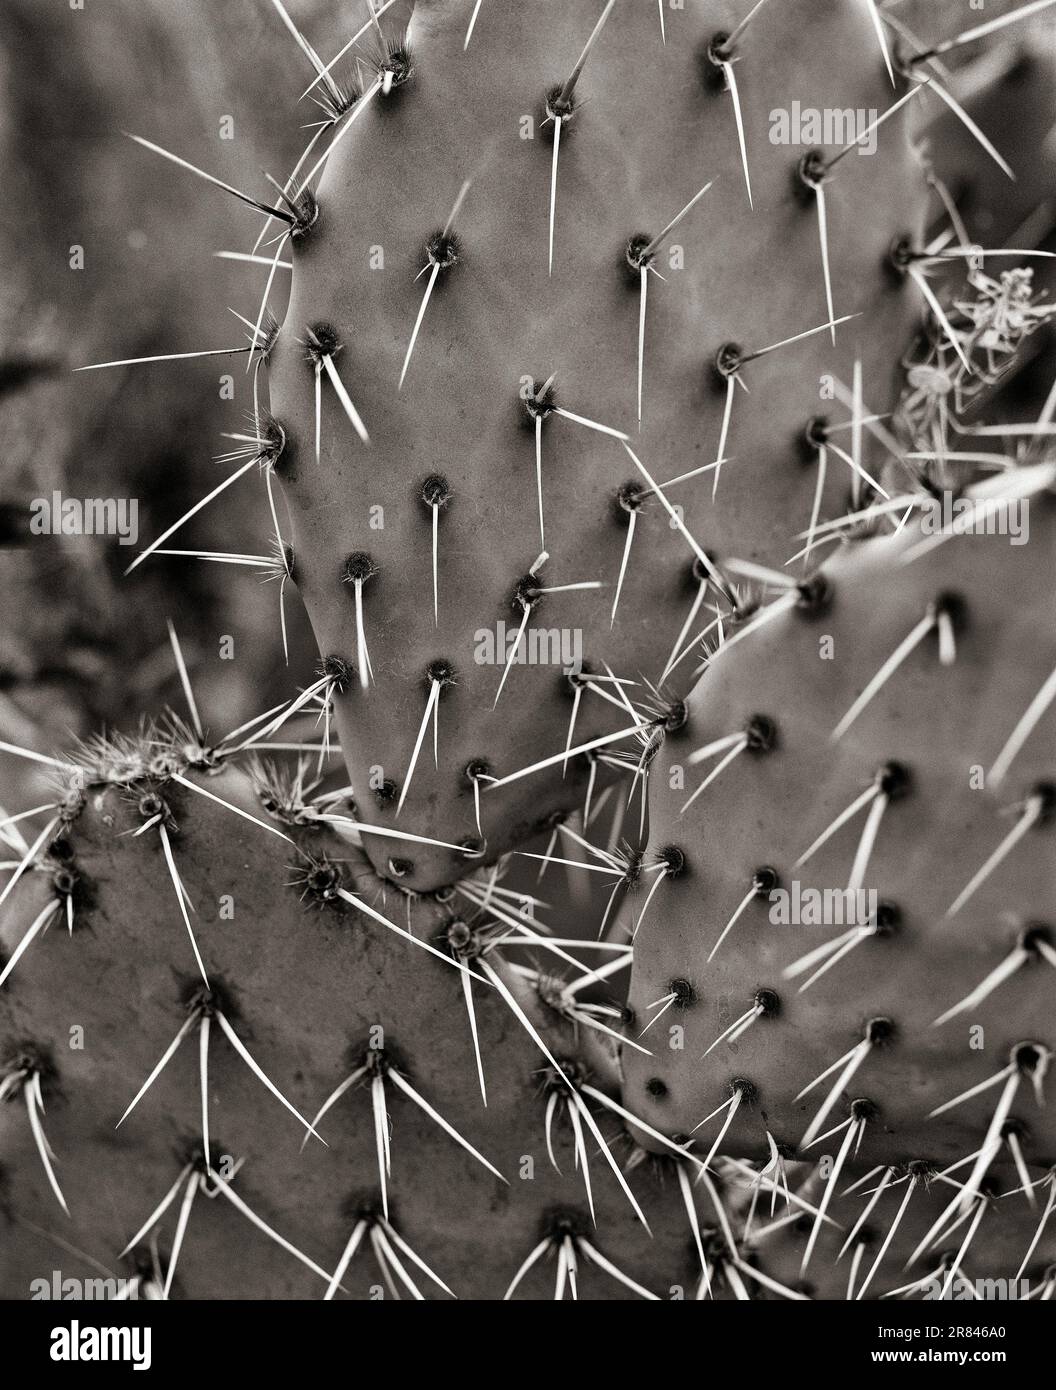 prickly pear cactus (Opuntia) is seen in a close-up and graphic vision Stock Photo